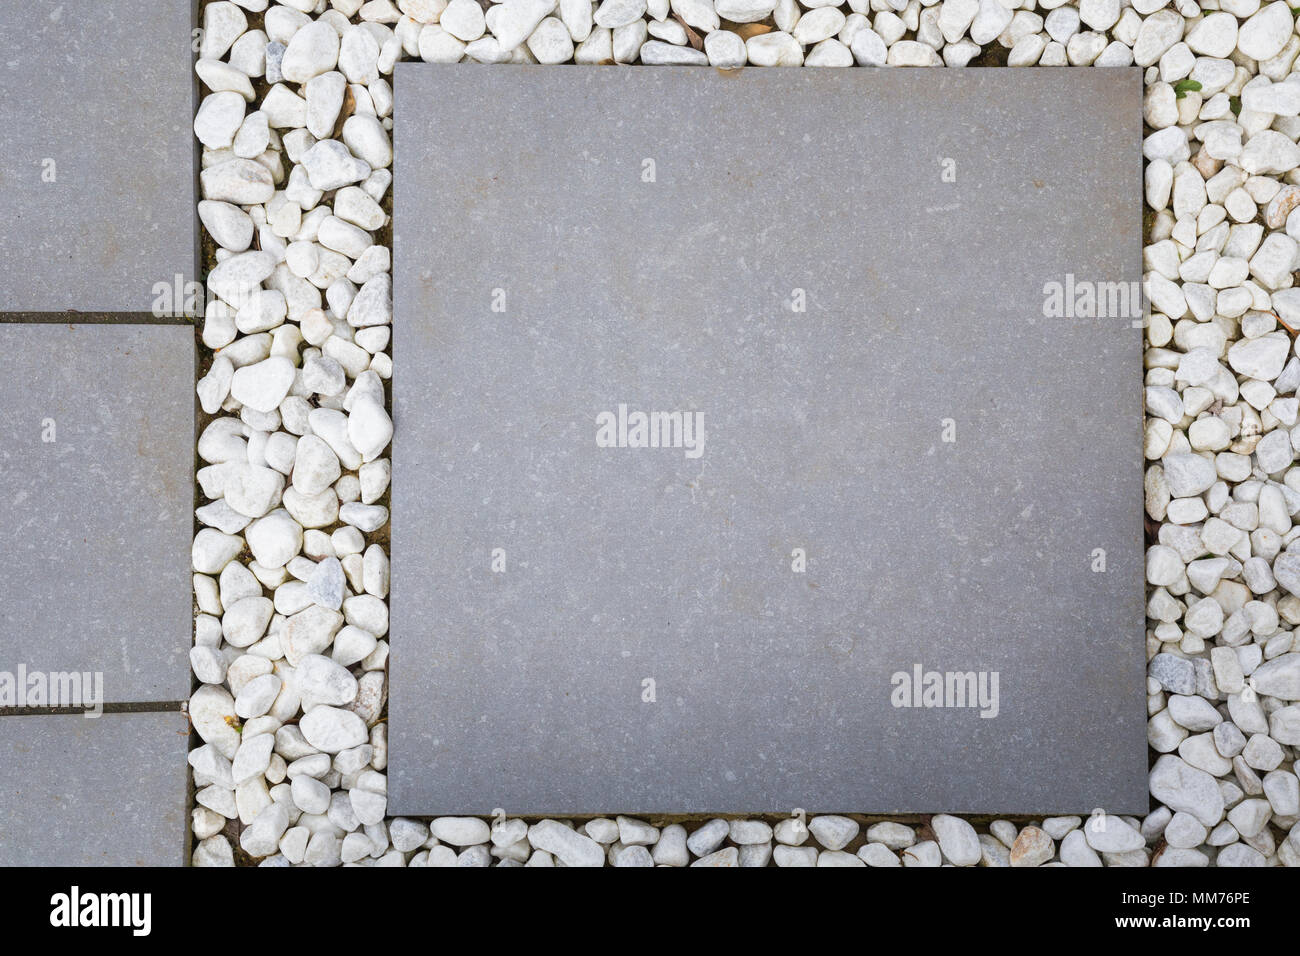 Detail Of Symphony Vitrified Paving Slab Path With White Pebbles Credits Design By Zinnia Garden Design Construction By 4 Life Landscapes Stock Photo Alamy